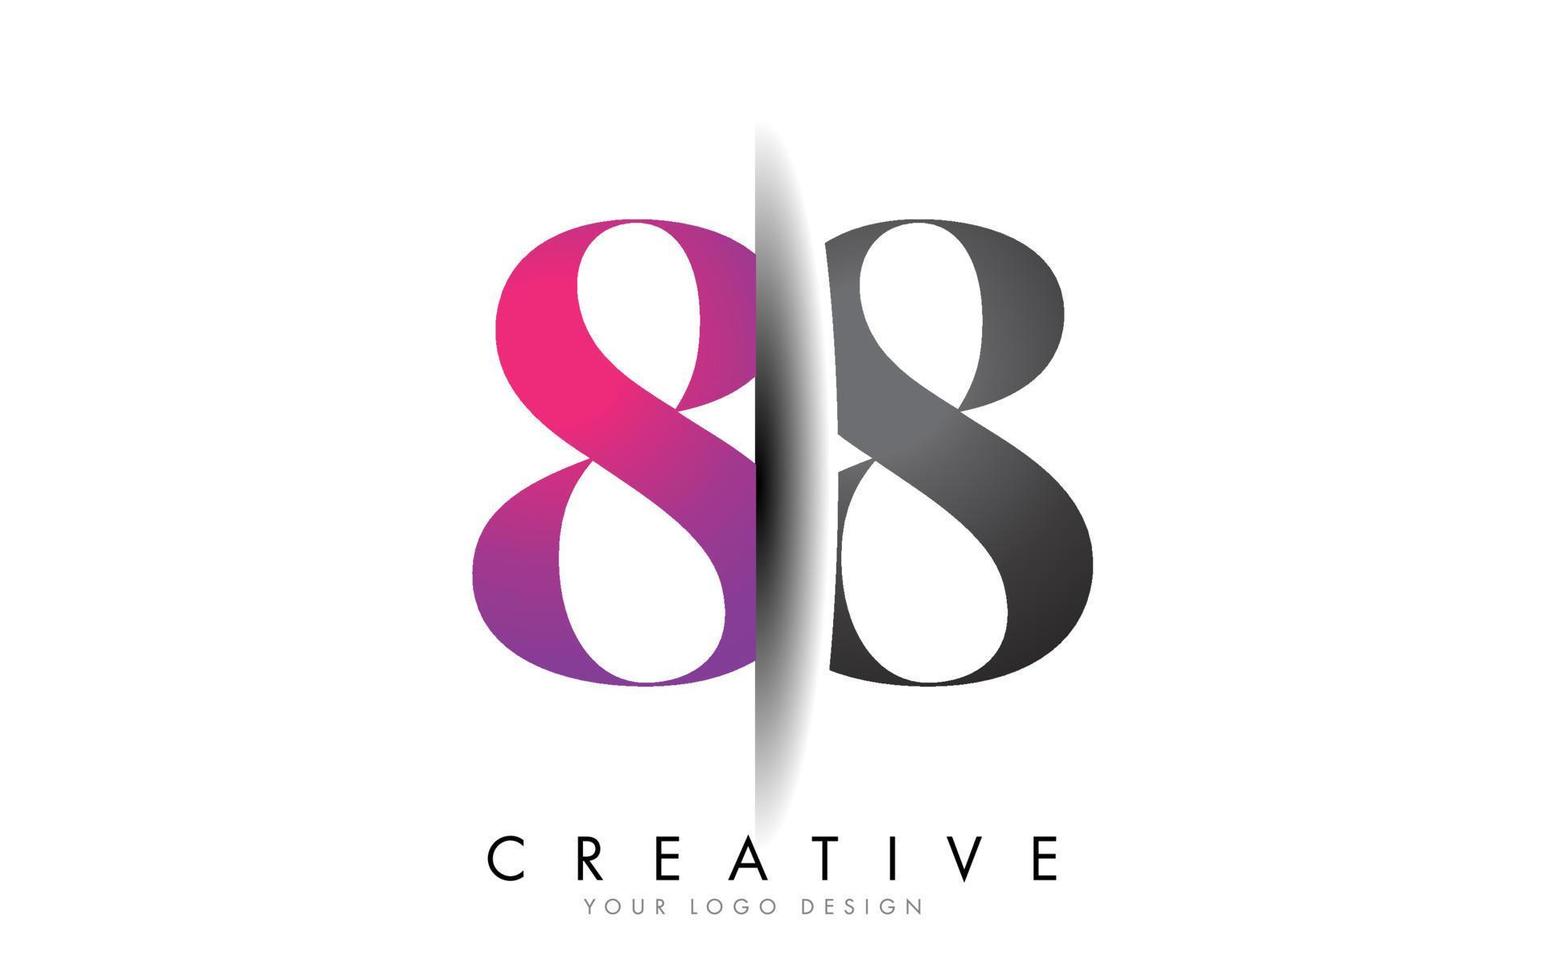 88 8 Grey and Pink Number Logo with Creative Shadow Cut Vector